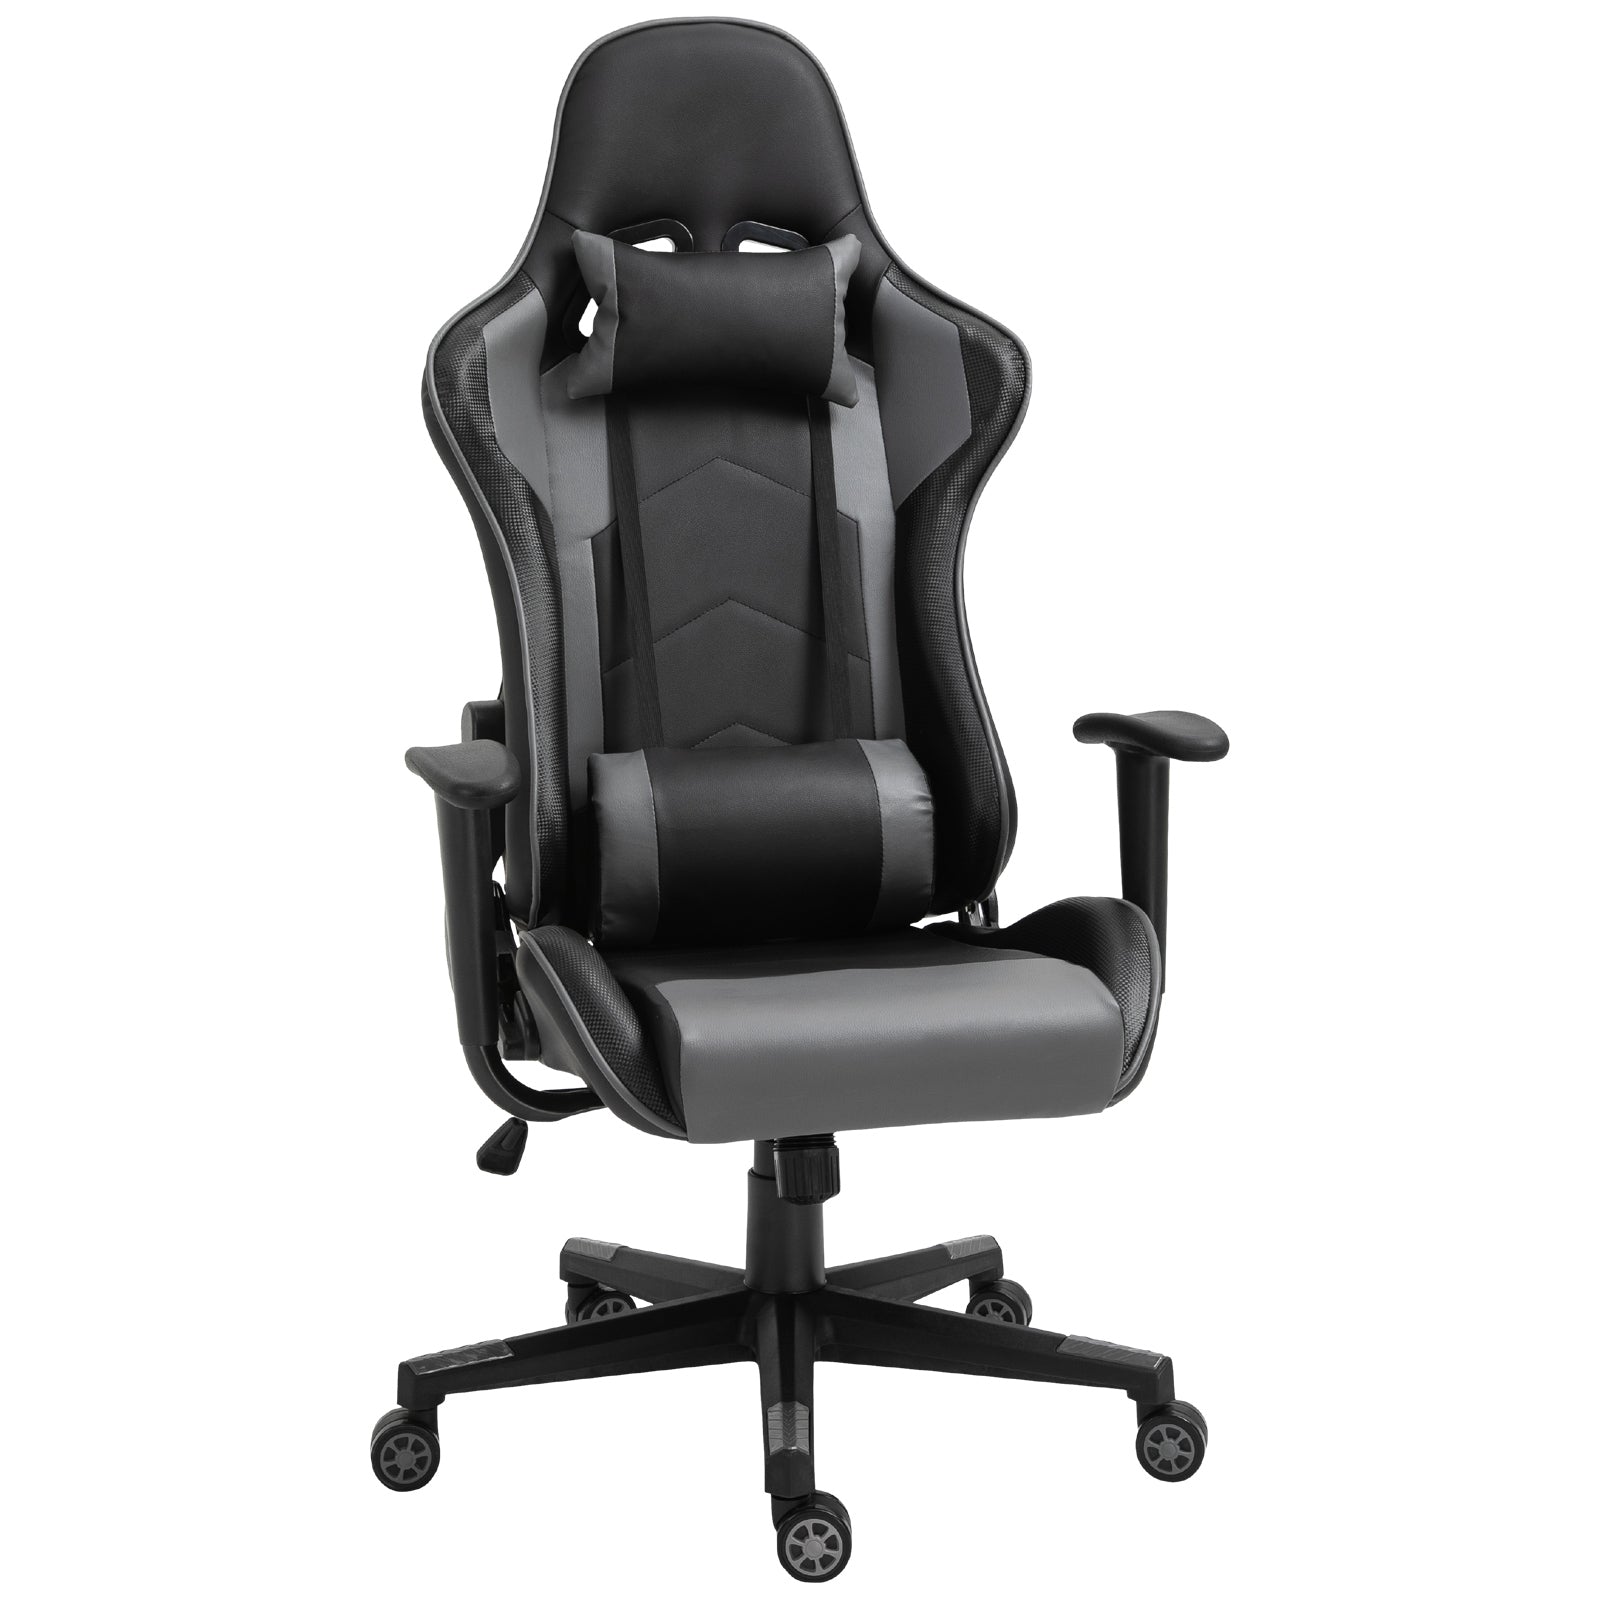 High Back Racing Gaming Chair, PU Leather Reclining Computer Chair with Head Pillow and Lumbar Support, Black-0